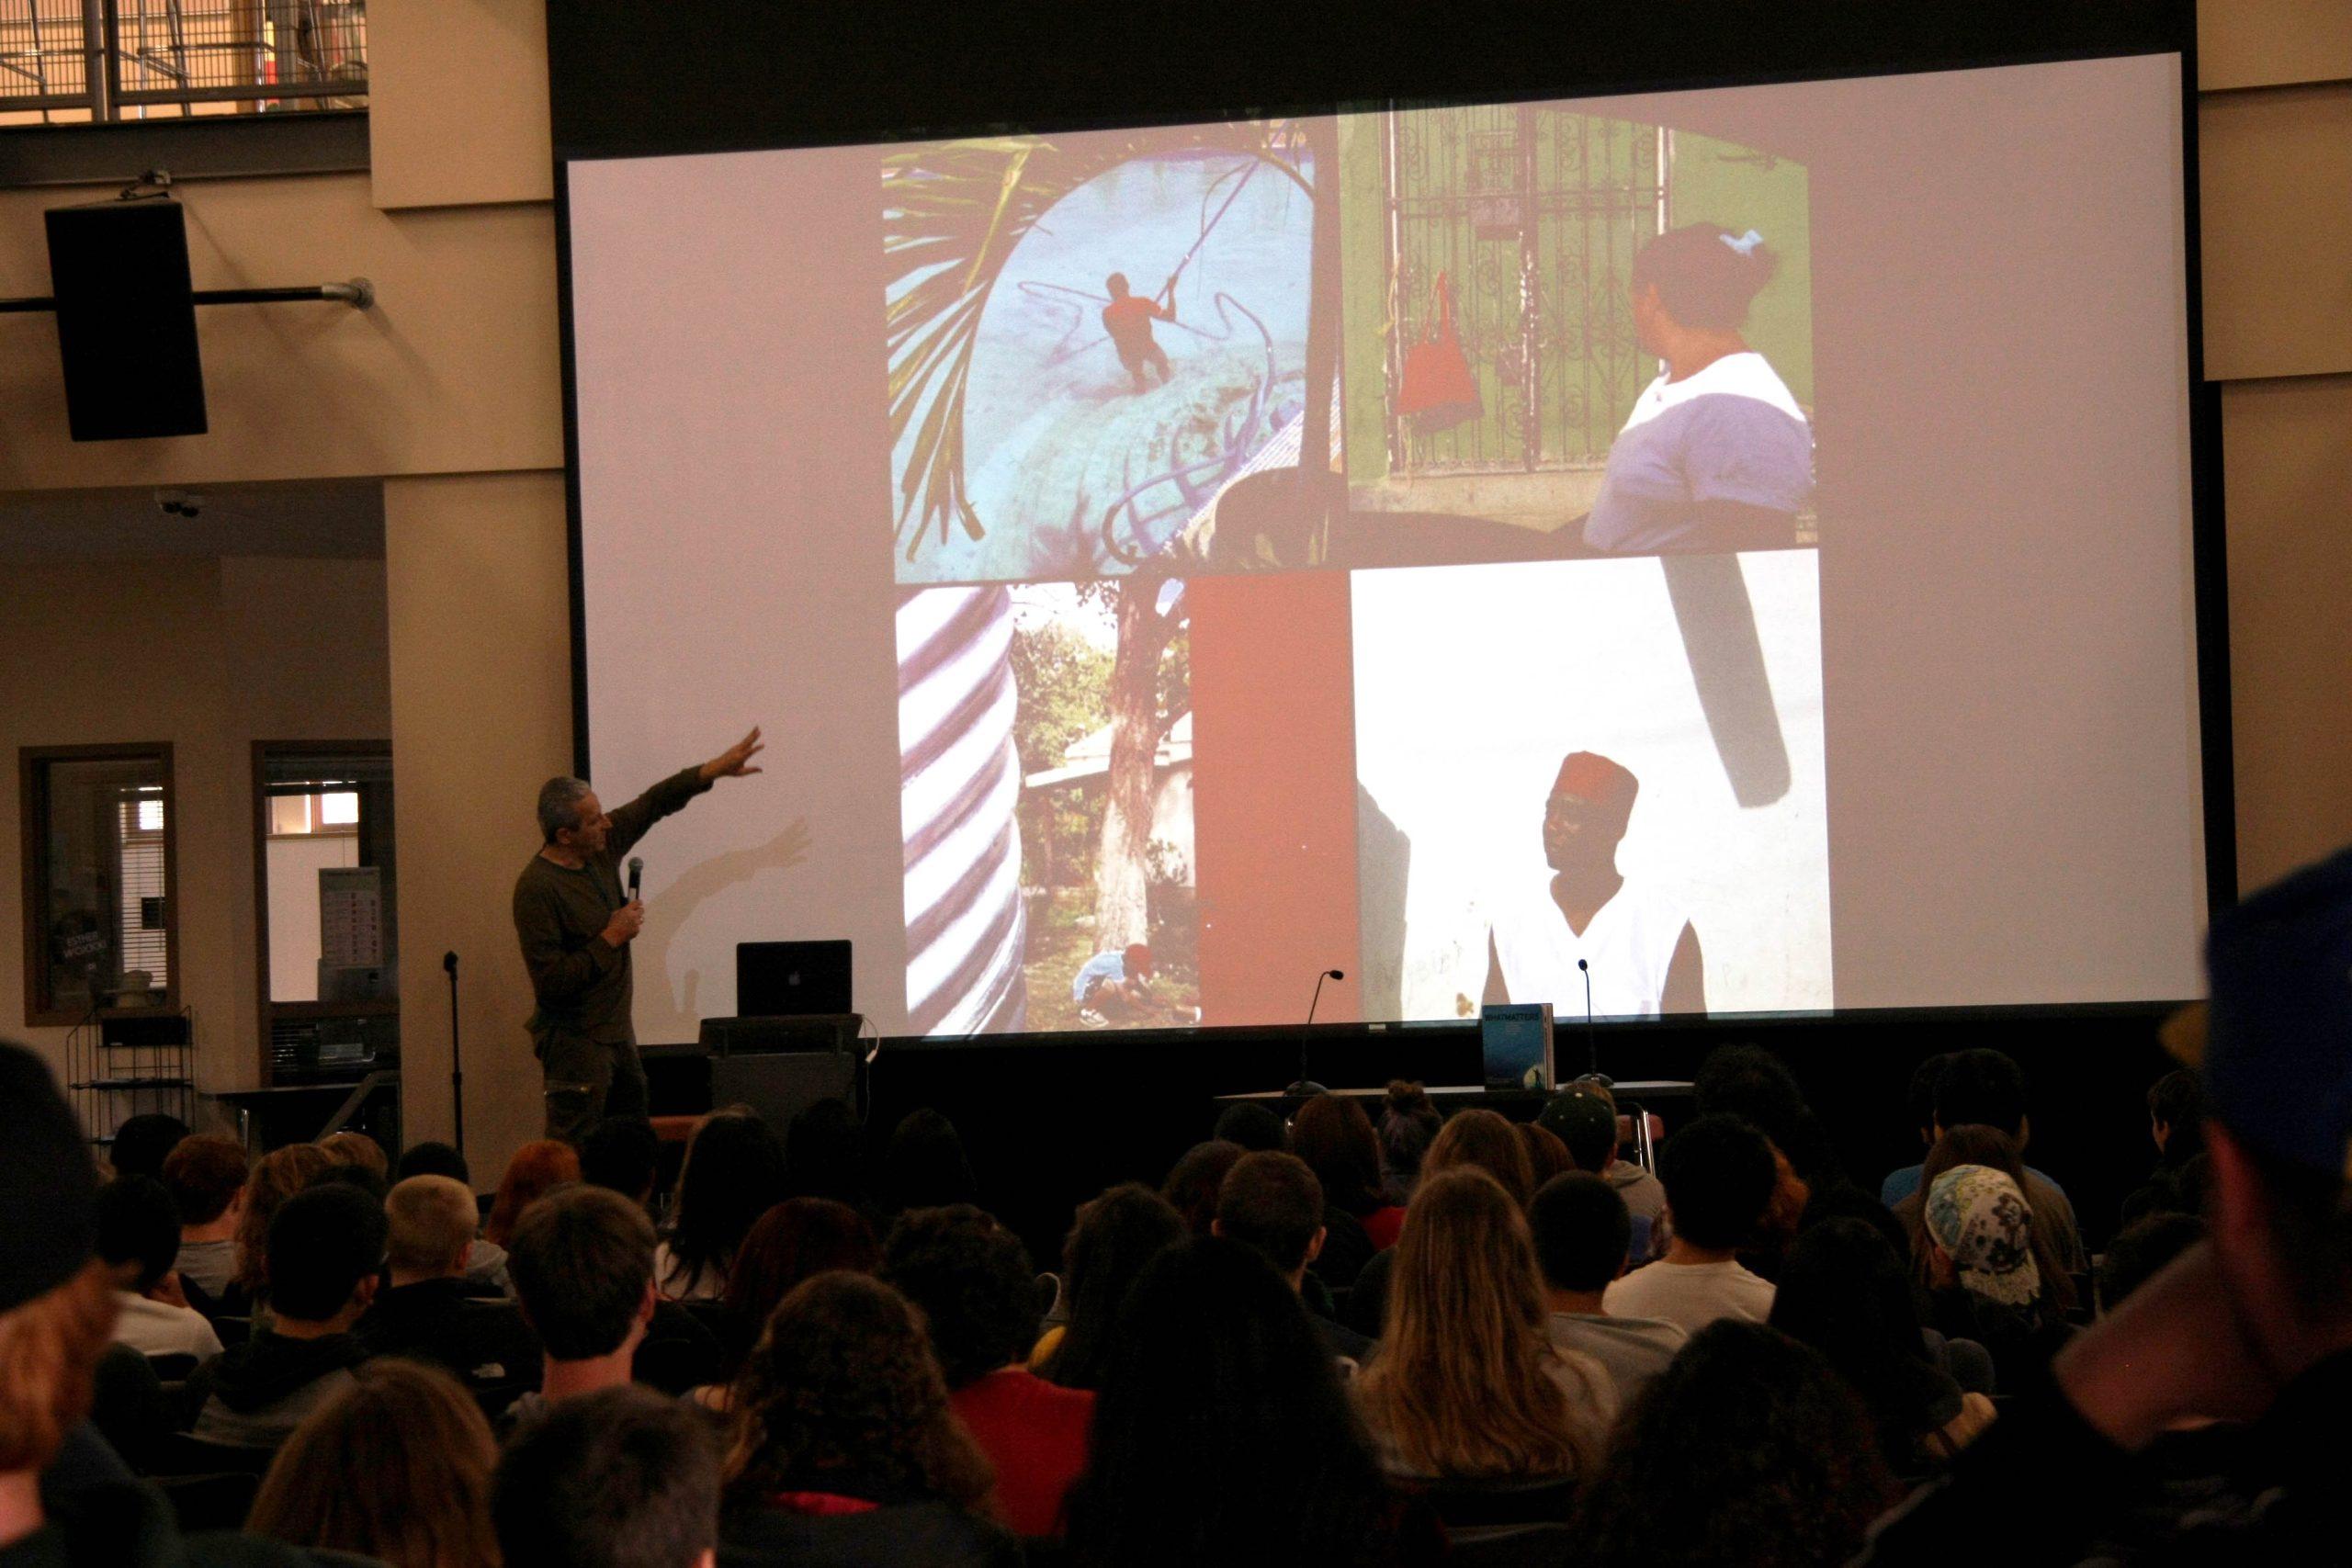 Kashi, known for his provocative photography, presented at the photojournalism forum in the MAC, hoping to inspire students.